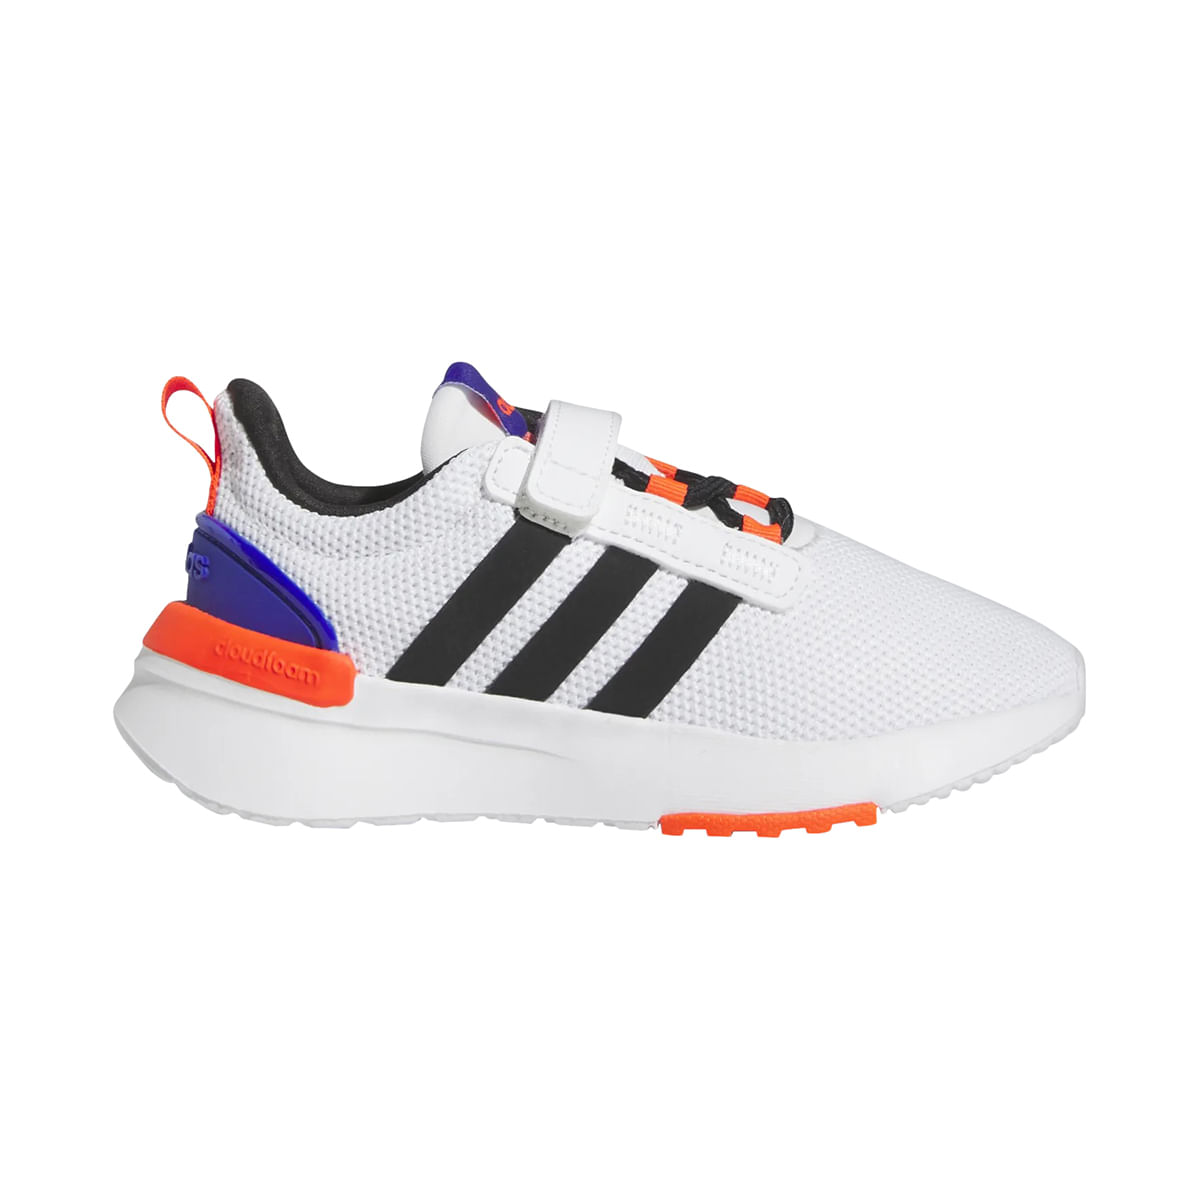 Bitterhed Manifold dø Adidas Baby RACER TR21 FTWWHT - Paragon Sports